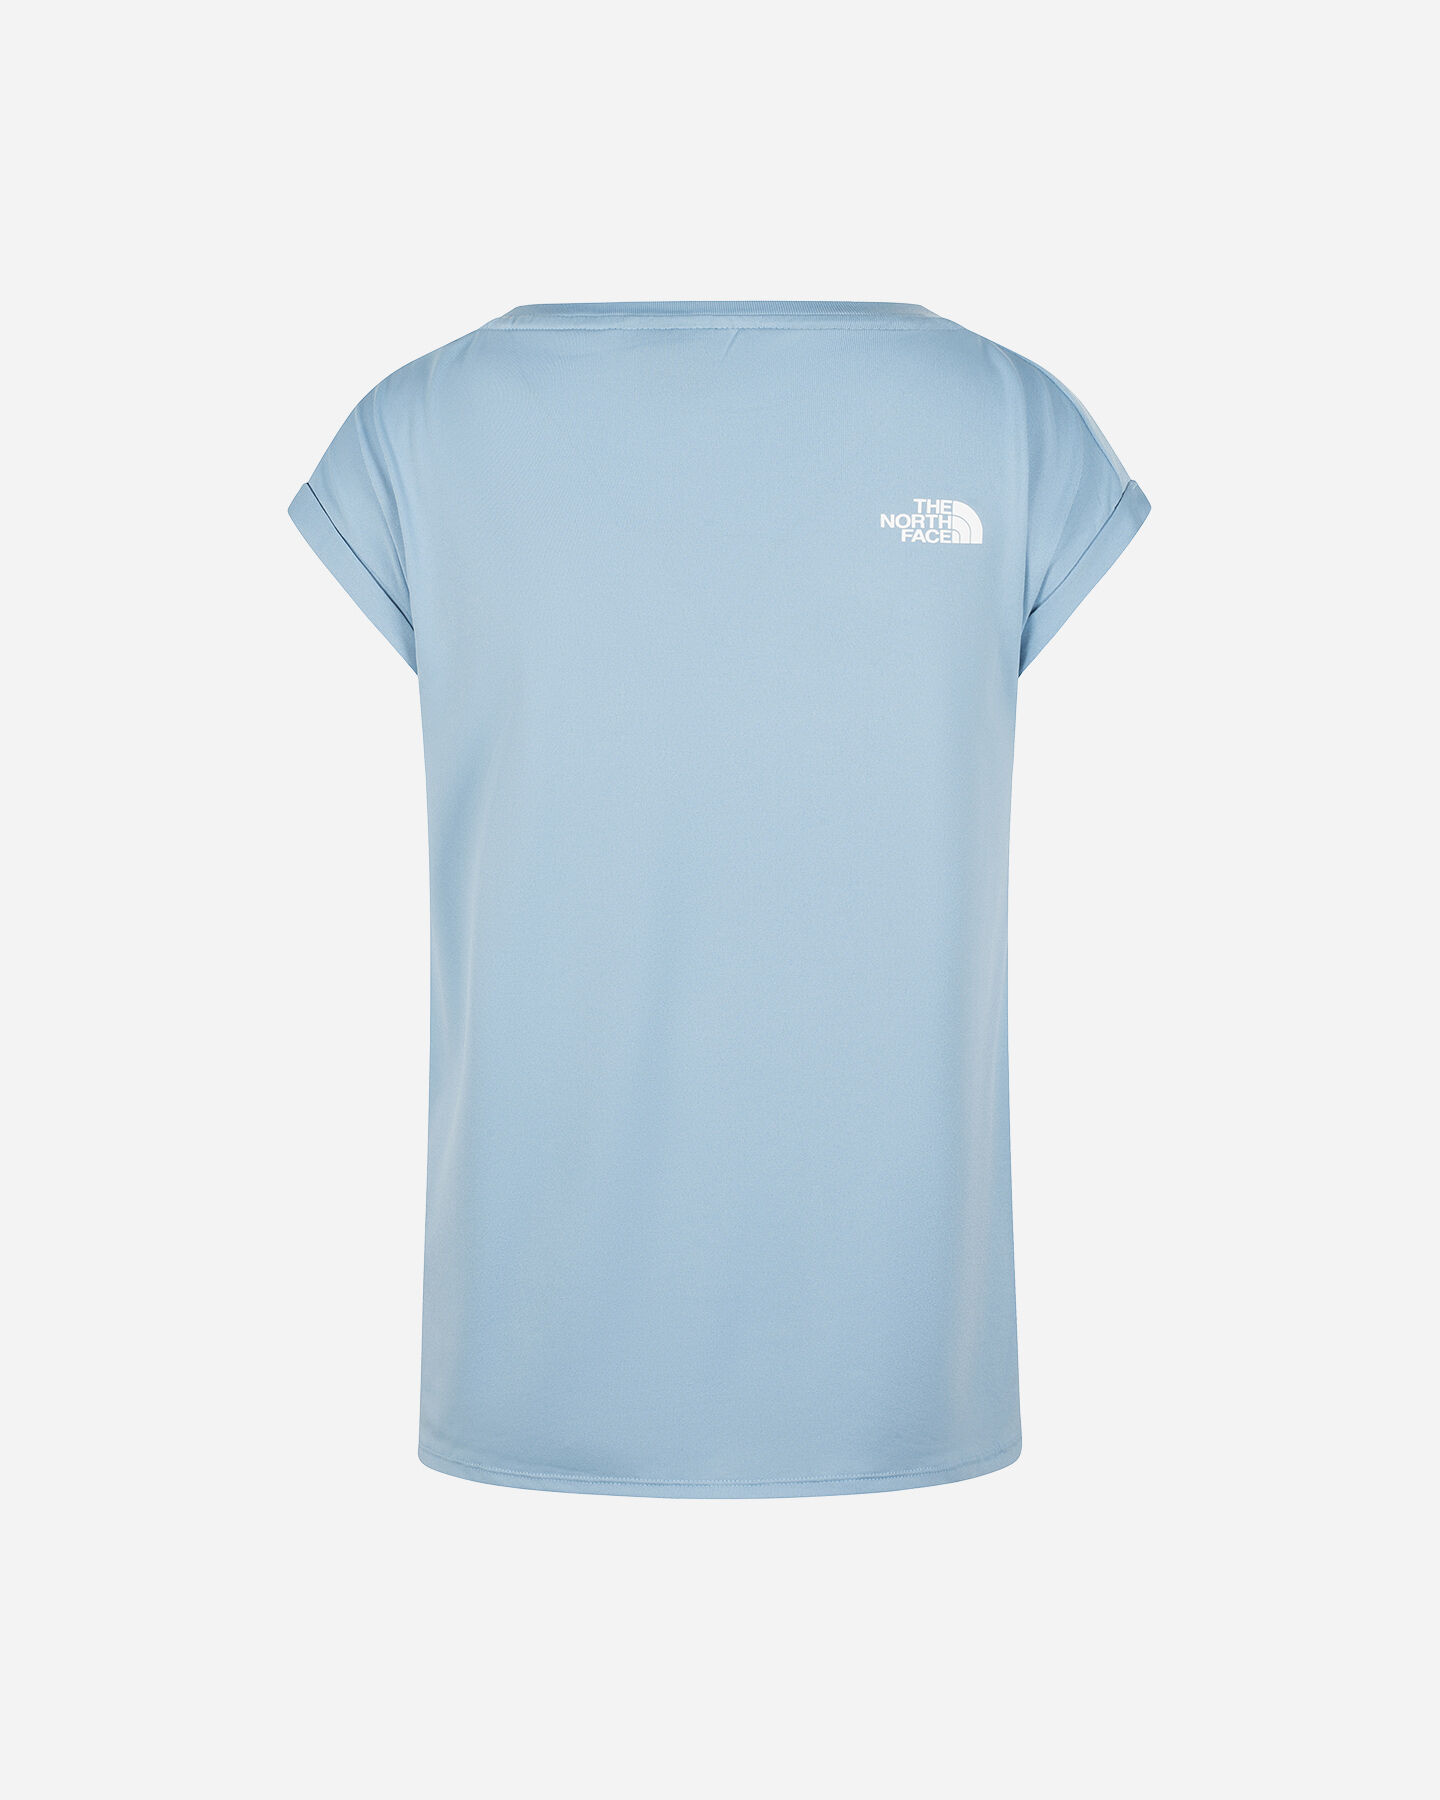  T-Shirt THE NORTH FACE NEW TECH W S5666495|QEO|XS scatto 1